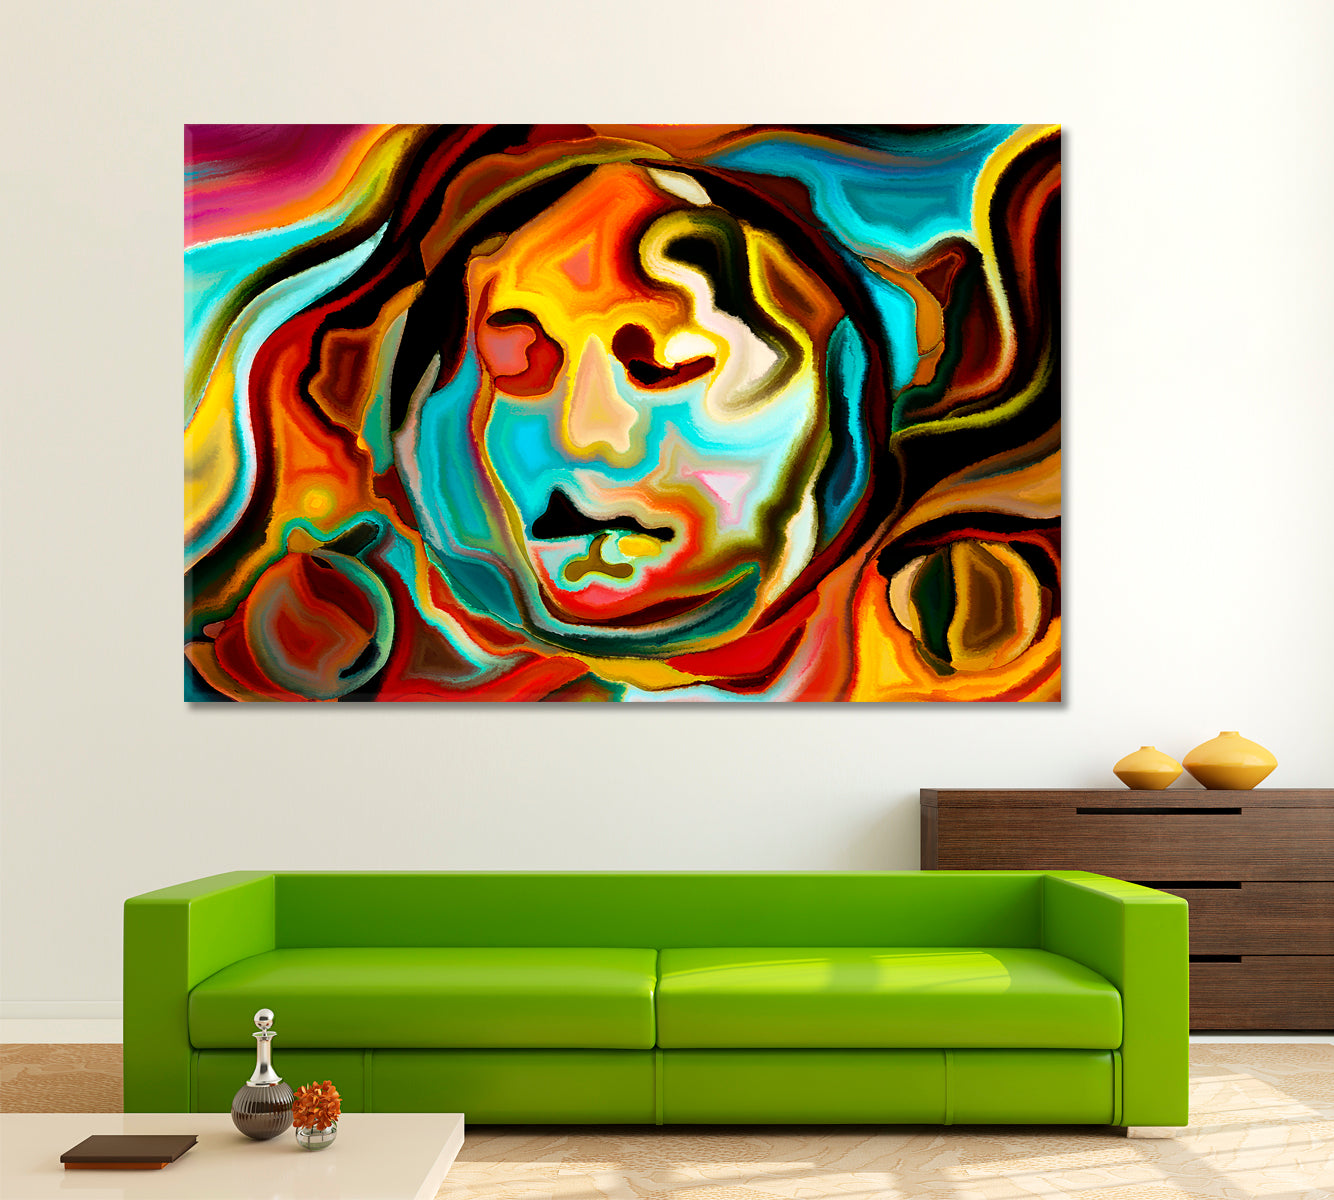 Composition of Human Features, Colors and Abstract Shapes Abstract Art Print Artesty 1 panel 24" x 16" 